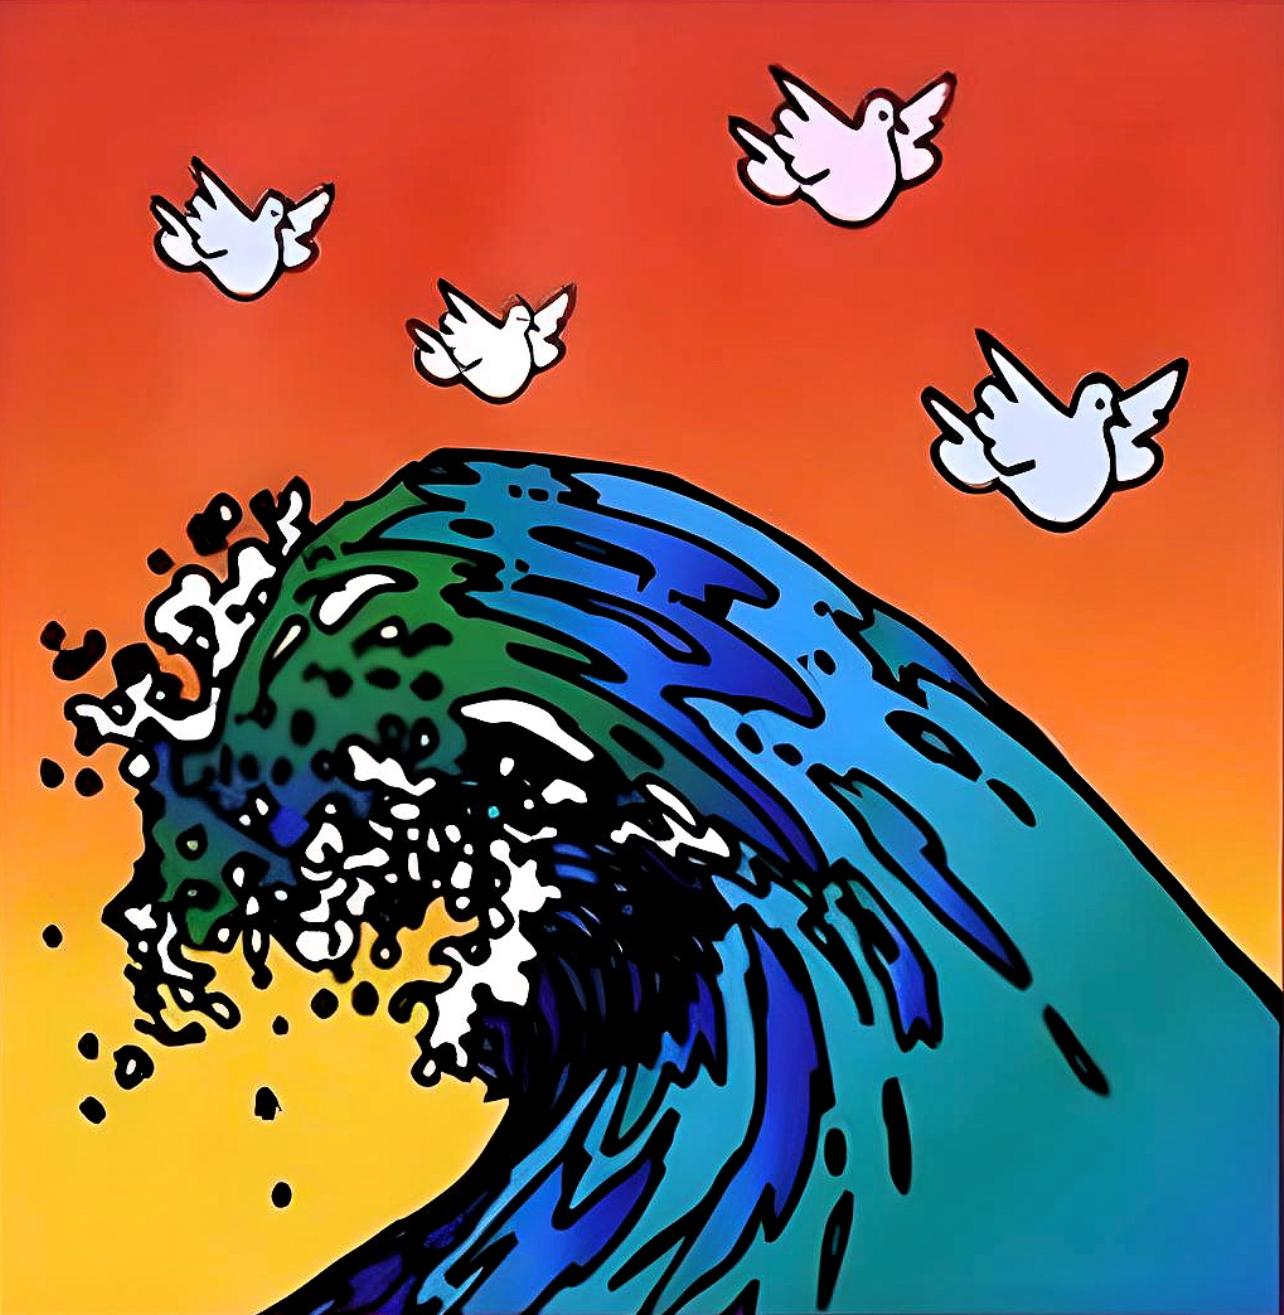 Artist: Peter Max (1937)
Title: Great Wave with Doves
Year: 2002
Edition: 495/500, plus proofs
Medium: Lithograph on Lustro Saxony paper
Size: 4.87 x 4.5 inches
Condition: Excellent
Inscription: Signed and numbered by the artist.
Notes: Published by